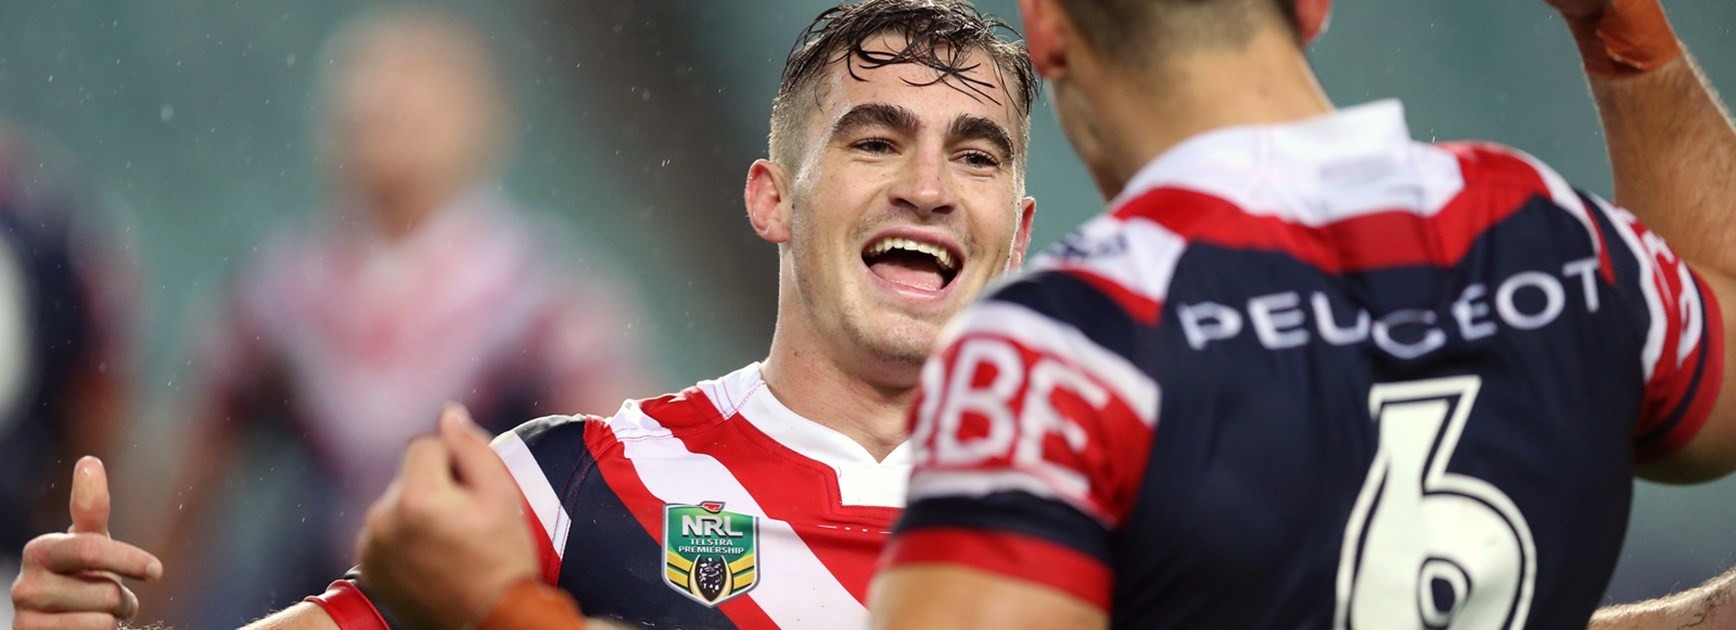 Roosters utility Connor Watson scored his first NRL try against Wests Tigers in Round 13.